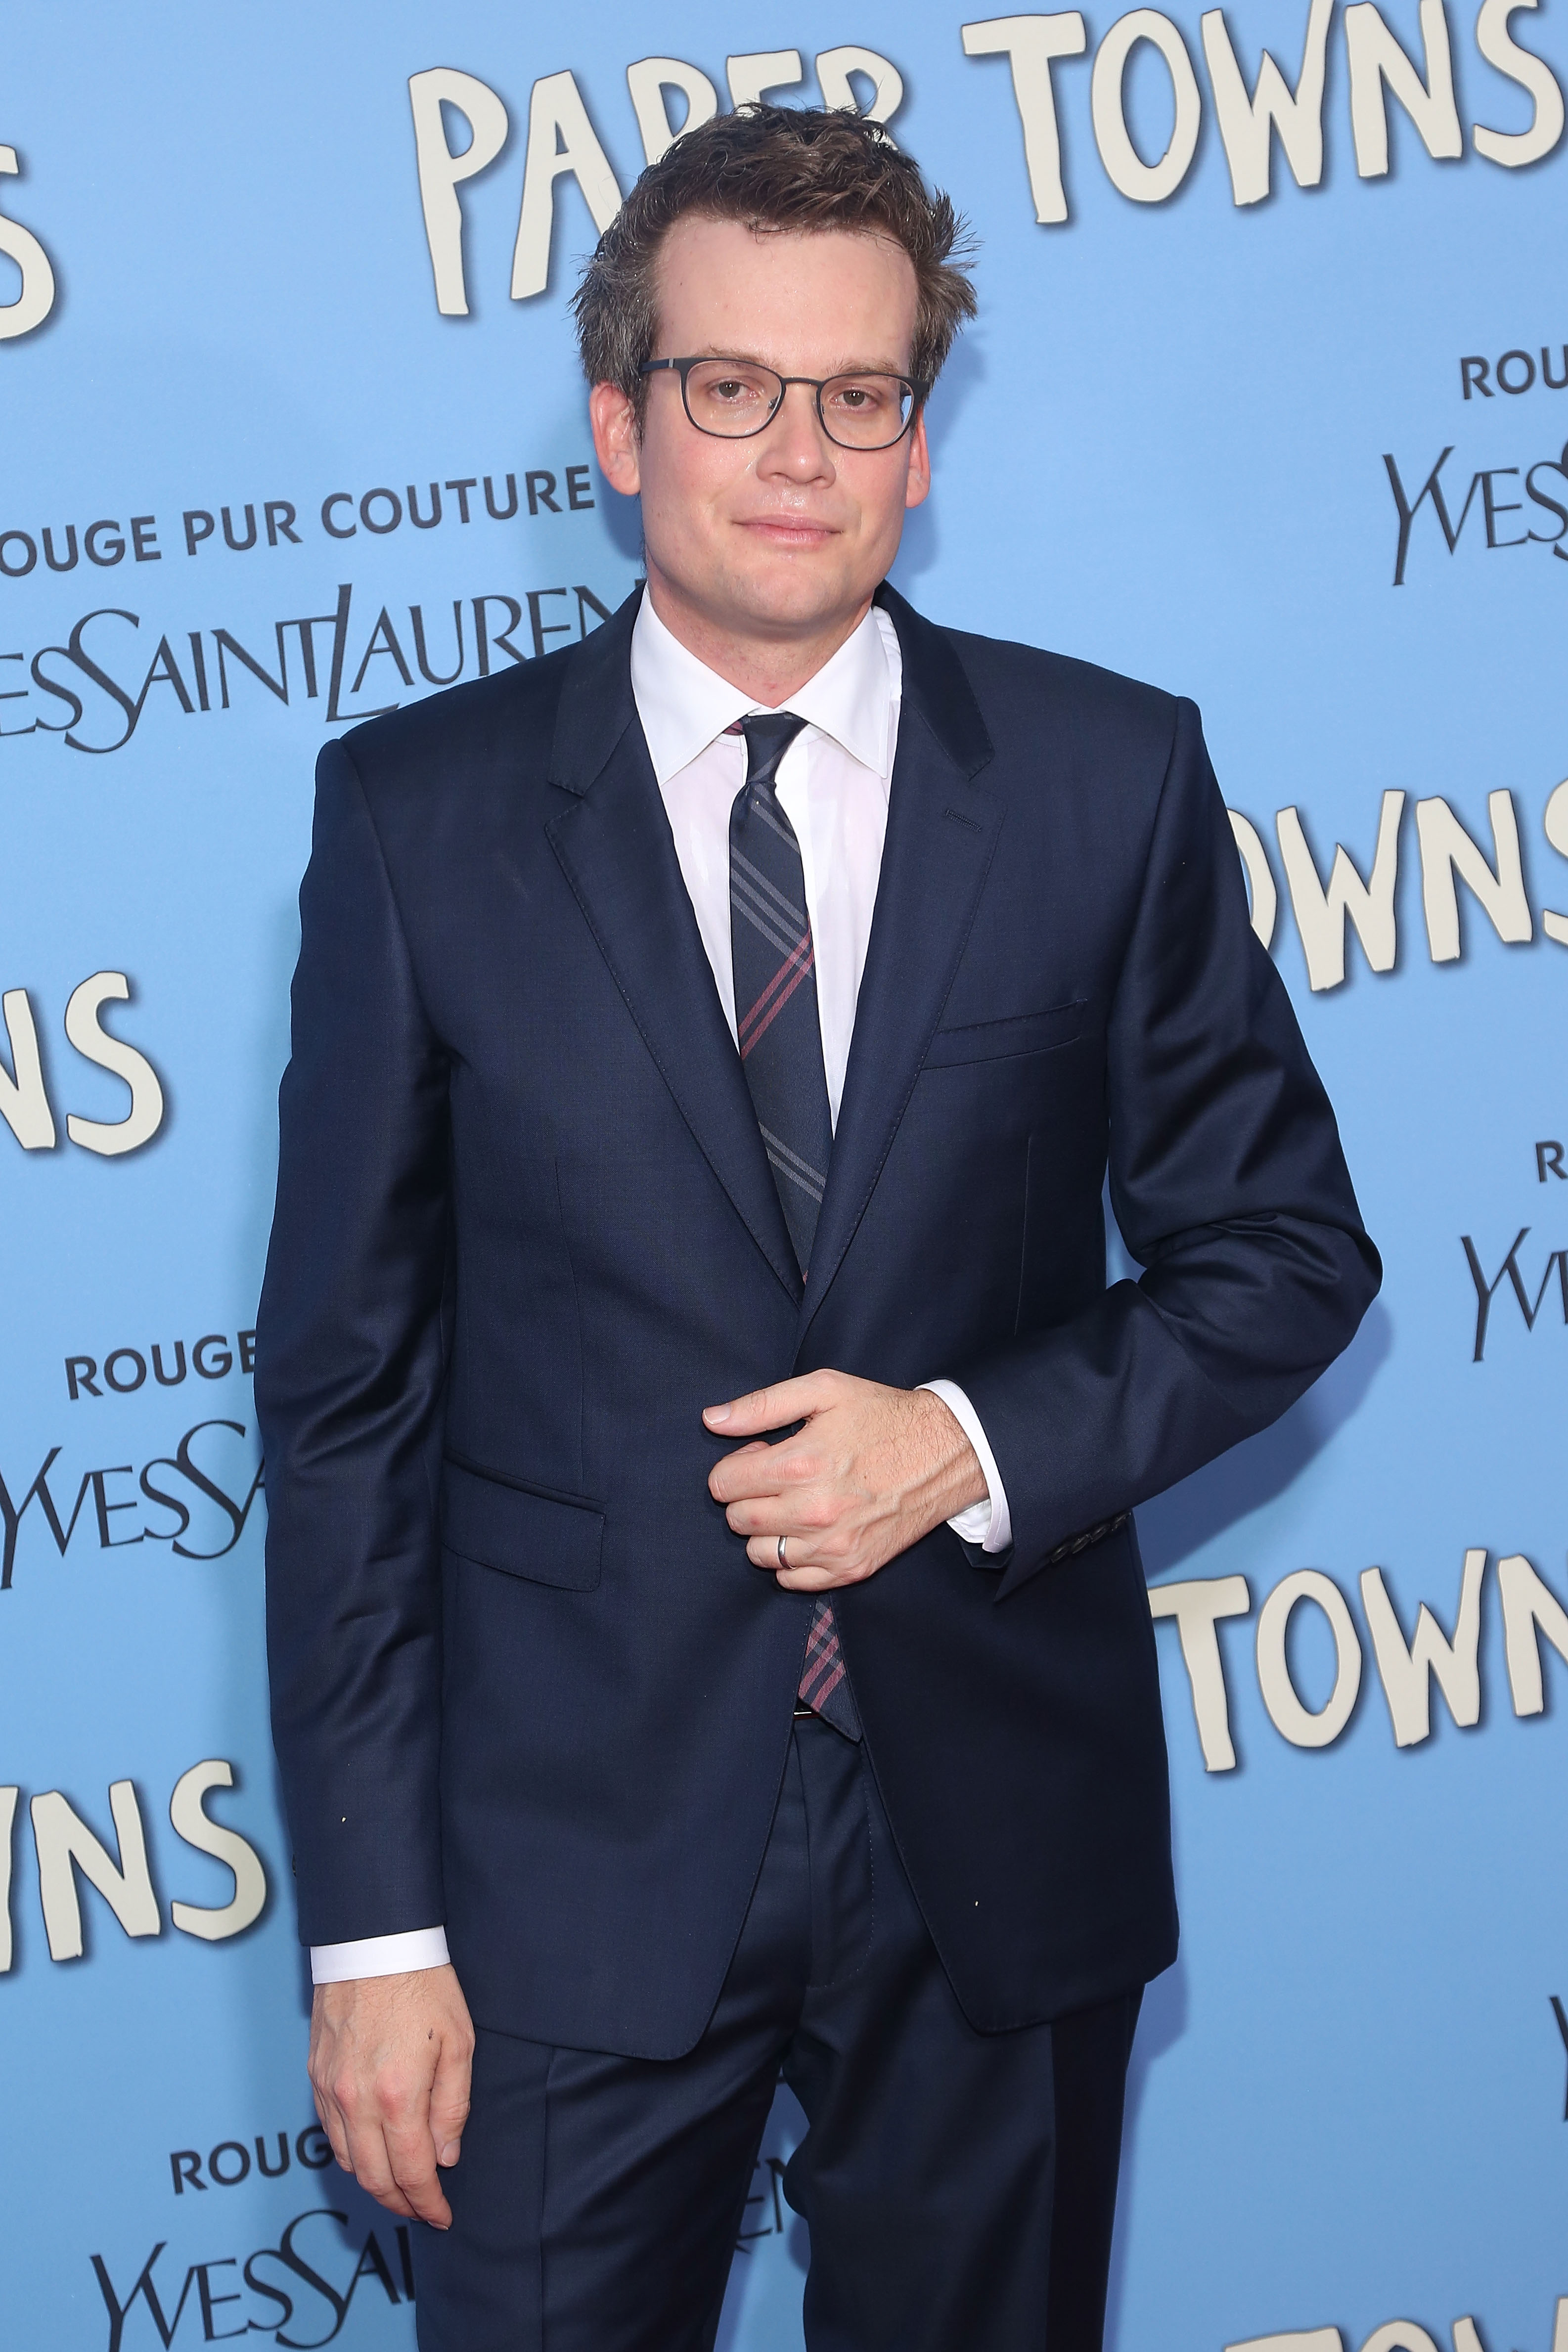 John Green attends the New York City premiere of "Paper Towns" on July 21, 2015. (Taylor Hill--Getty Images)